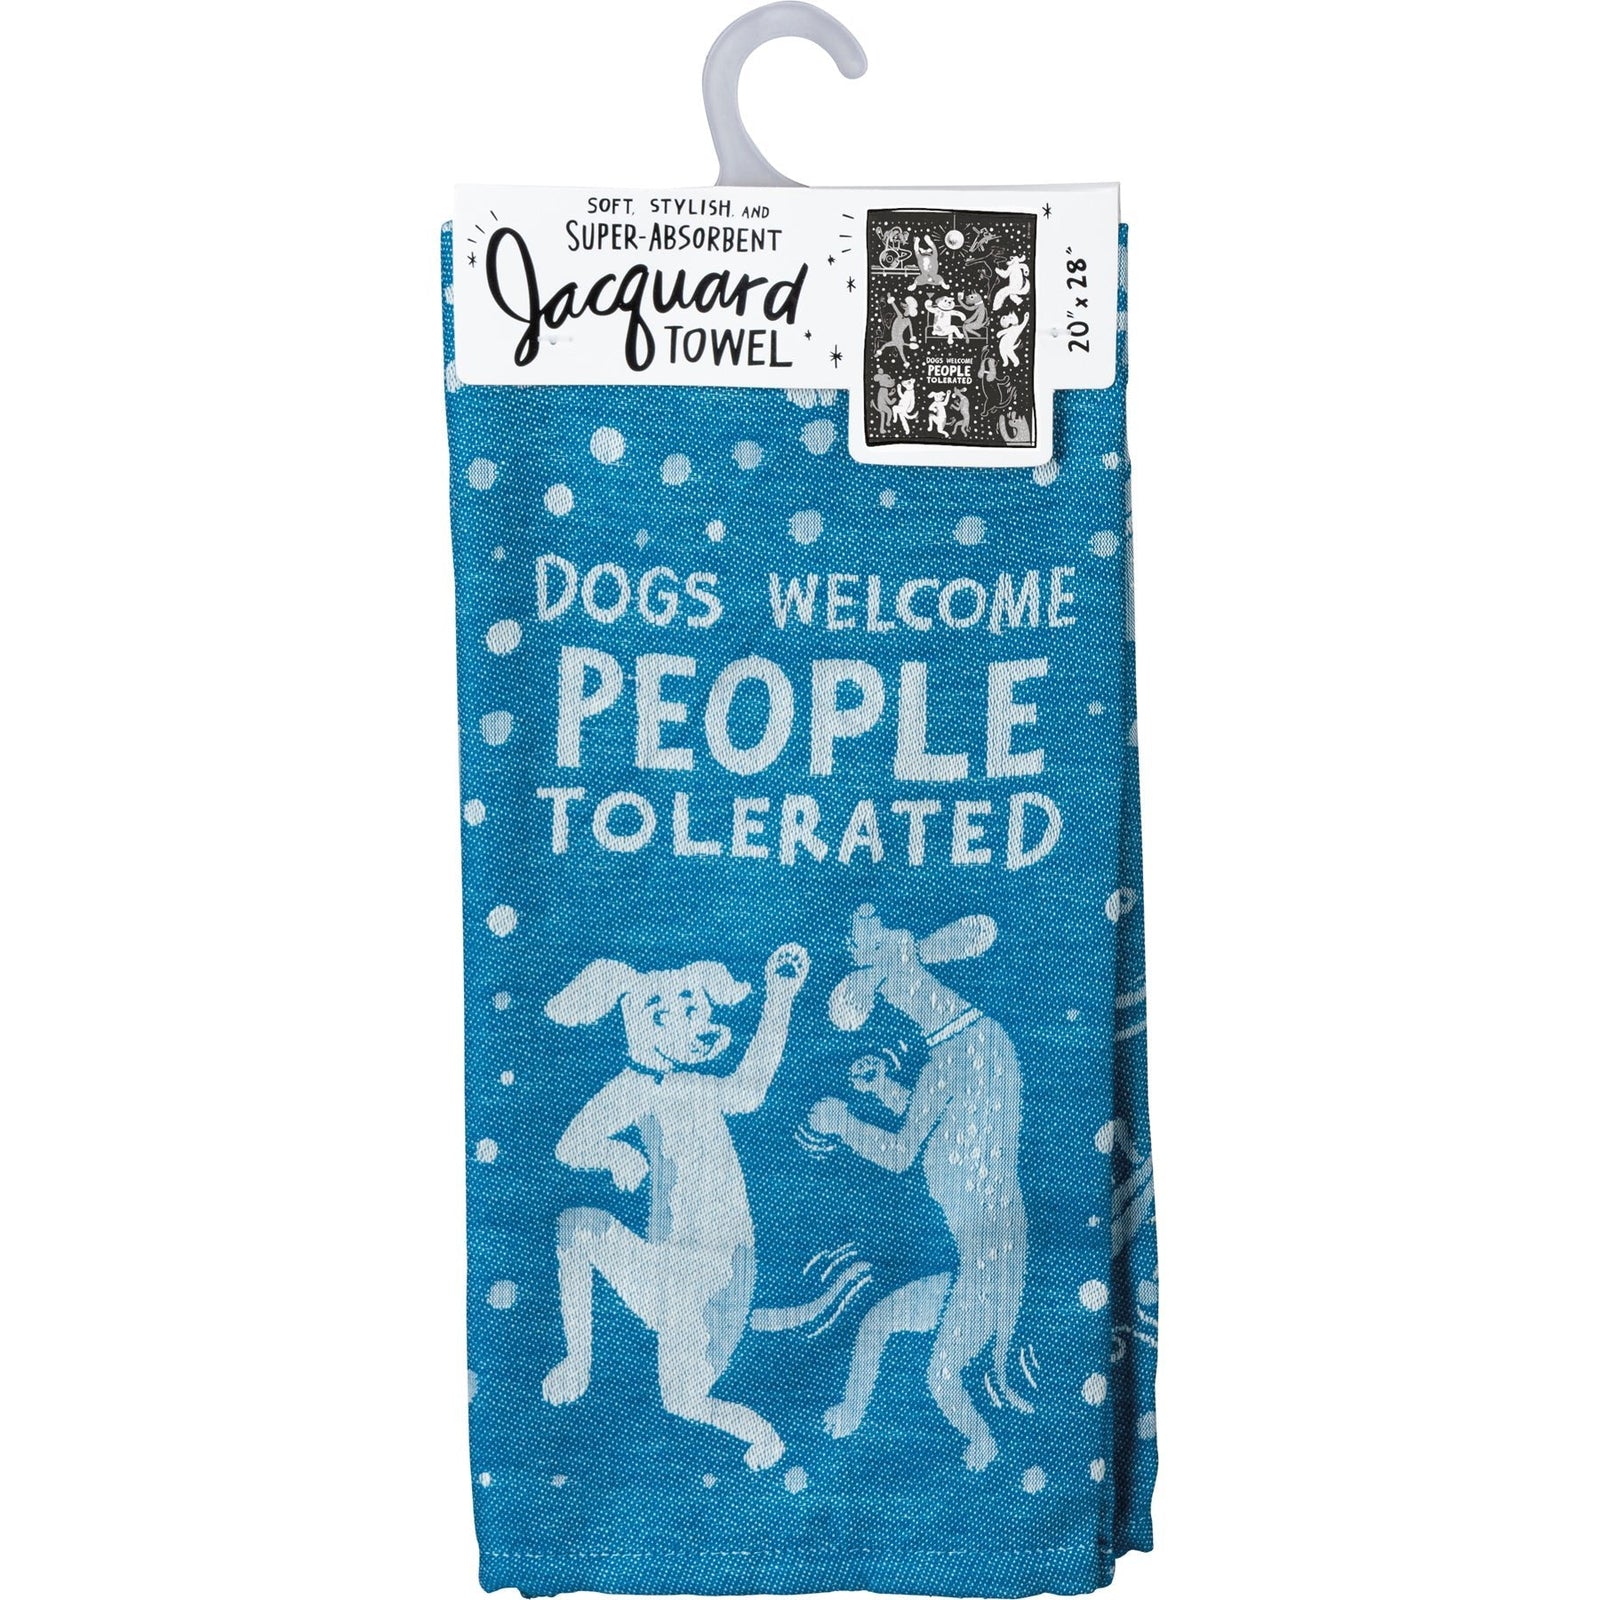 Dogs Welcome People Tolerated Dish Cloth Towel | Novelty Tea Towel | Cute Kitchen Hand Towel | 20" x 28"